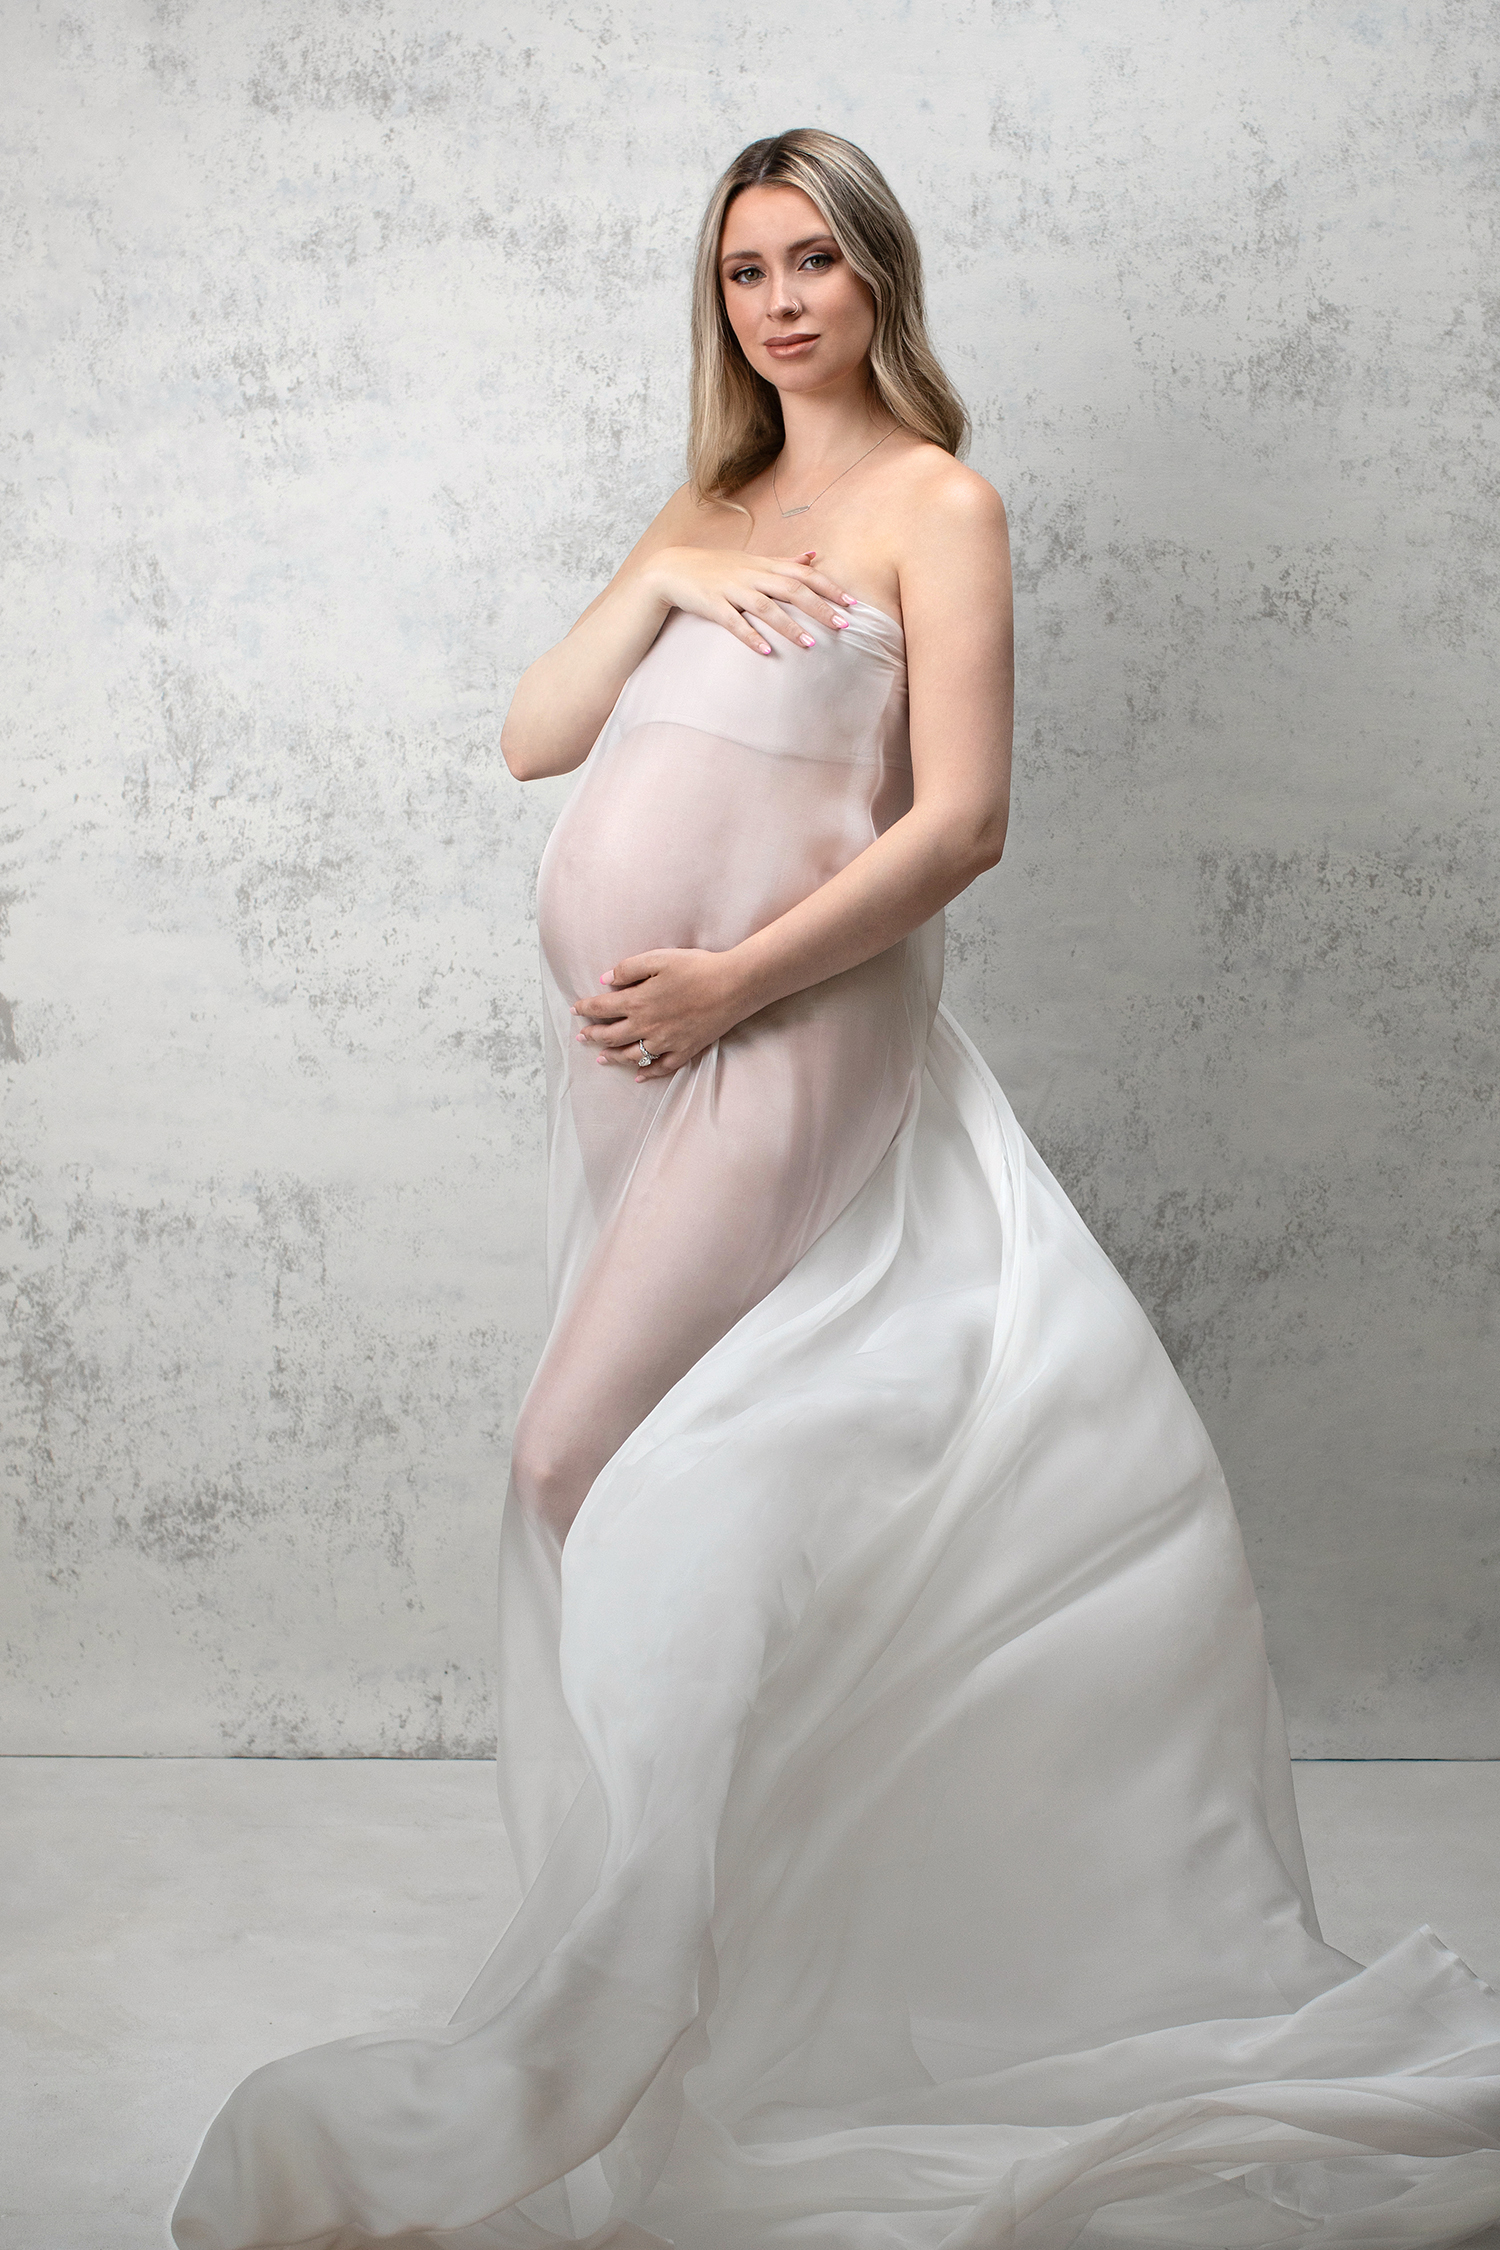 A portrayal of an expectant mother showcasing her elegance and sophistication in a luxurious maternity photography session.